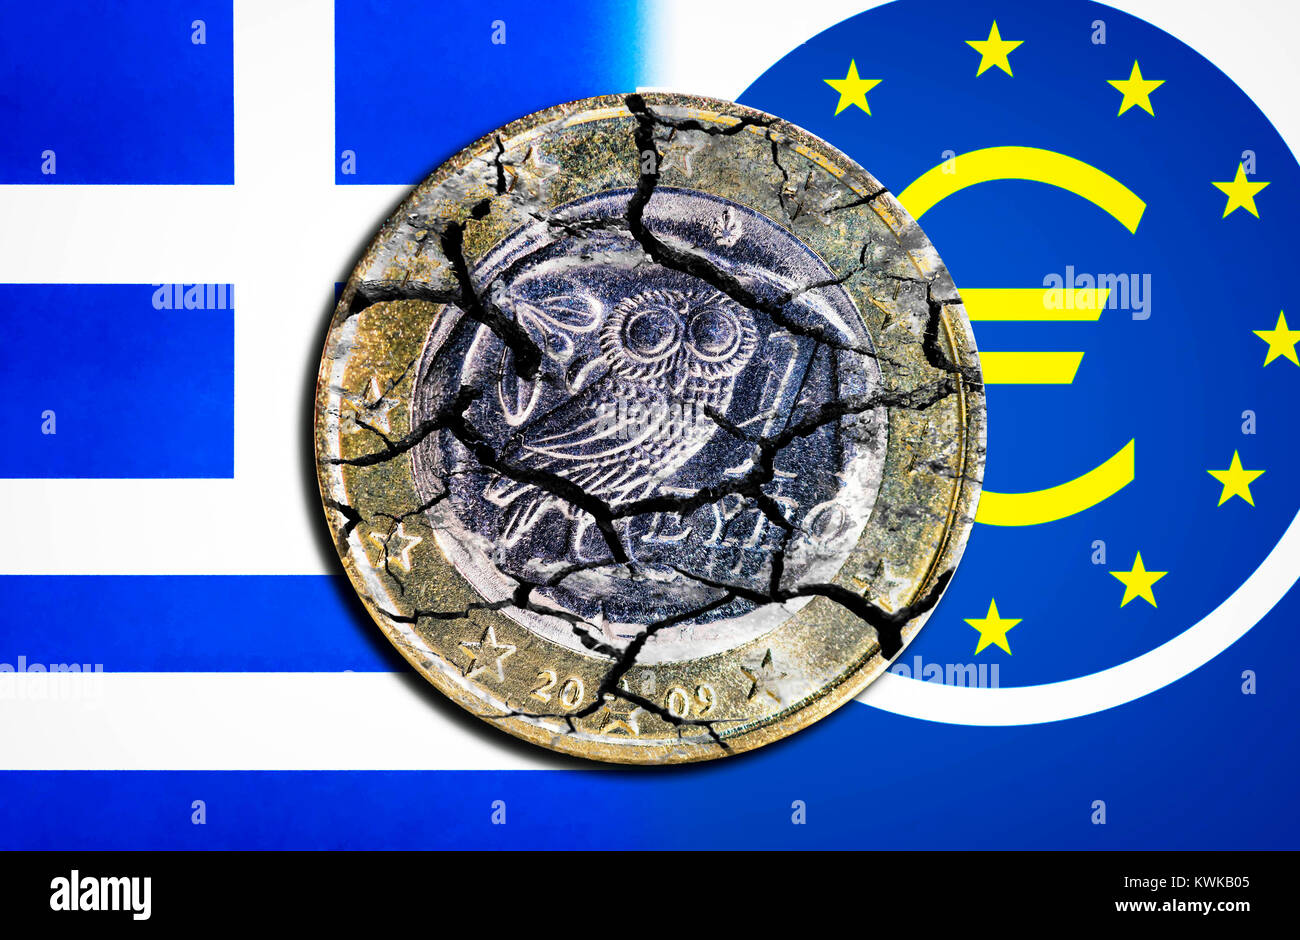 Greek eurocoin with tears before Greece and EZB flag, symbolic photo emergency loans for Greece, Griechische Eurom?nze mit Rissen vor Griechenland- un Stock Photo